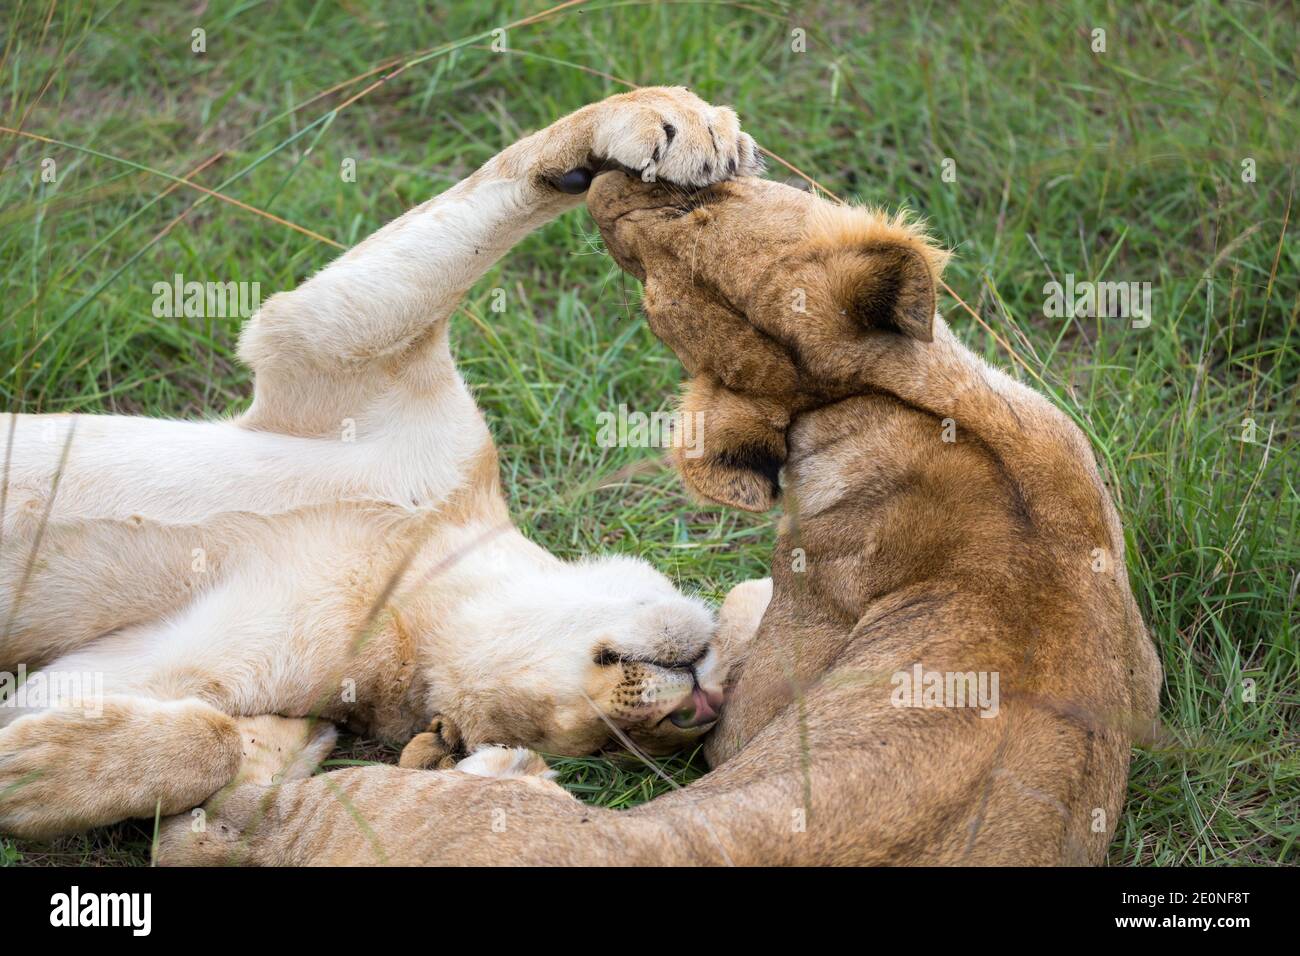 The young lions are playing together in the grass. Stock Photo